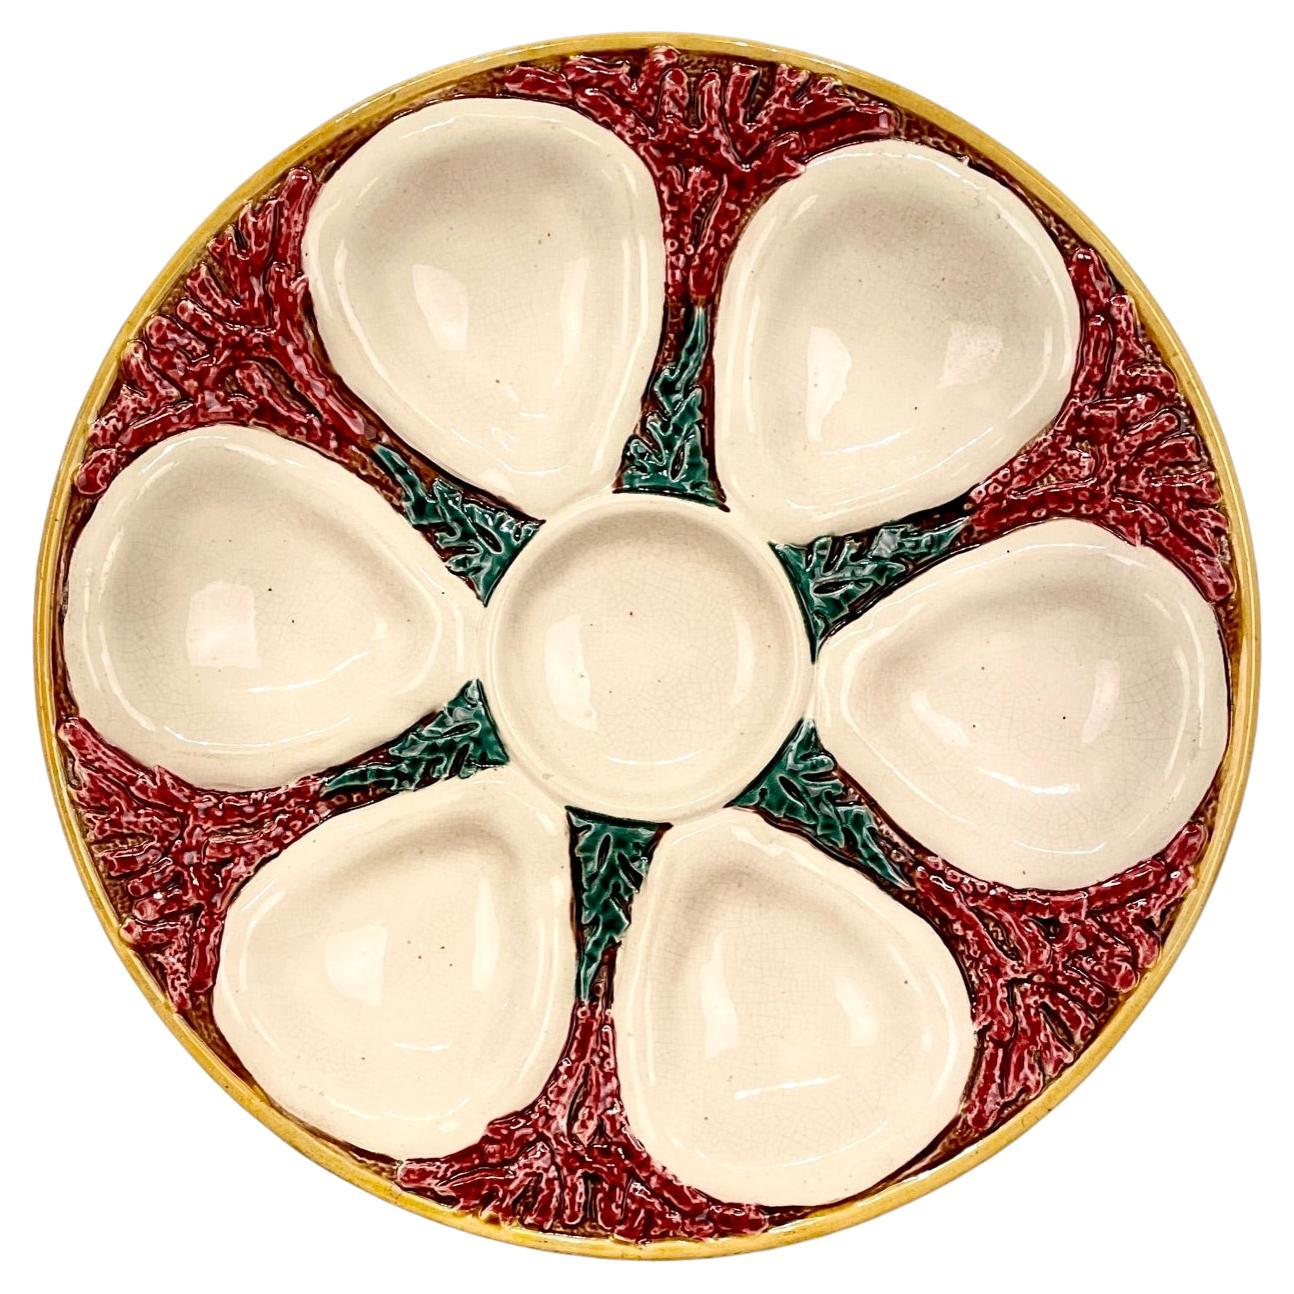 19th English Majolica Oyster Plate